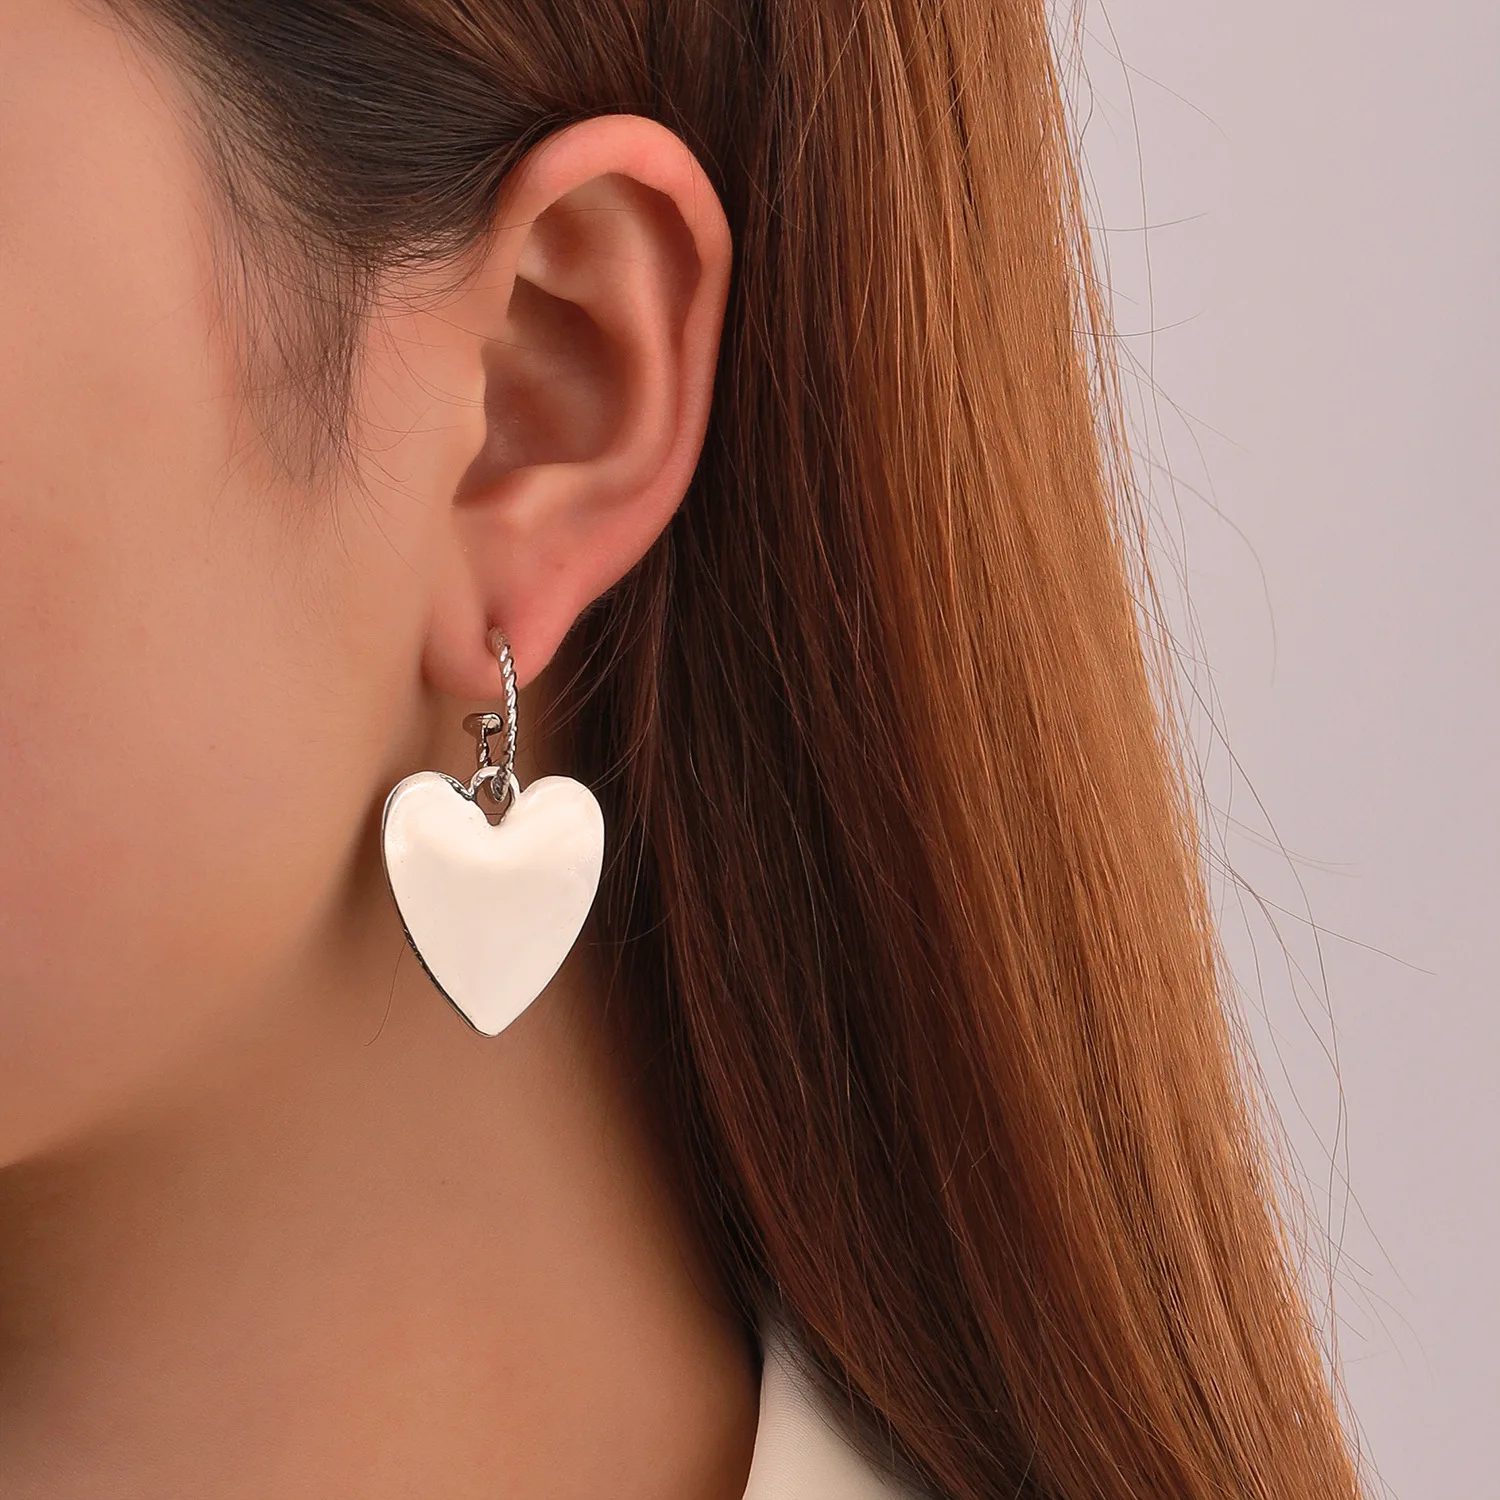 New Creative Acrylic Flame Love Drop Earrings for Women Retro Personality Hip Hop Earrings Fashion Jewelry 2021 Lovely Girl Gift